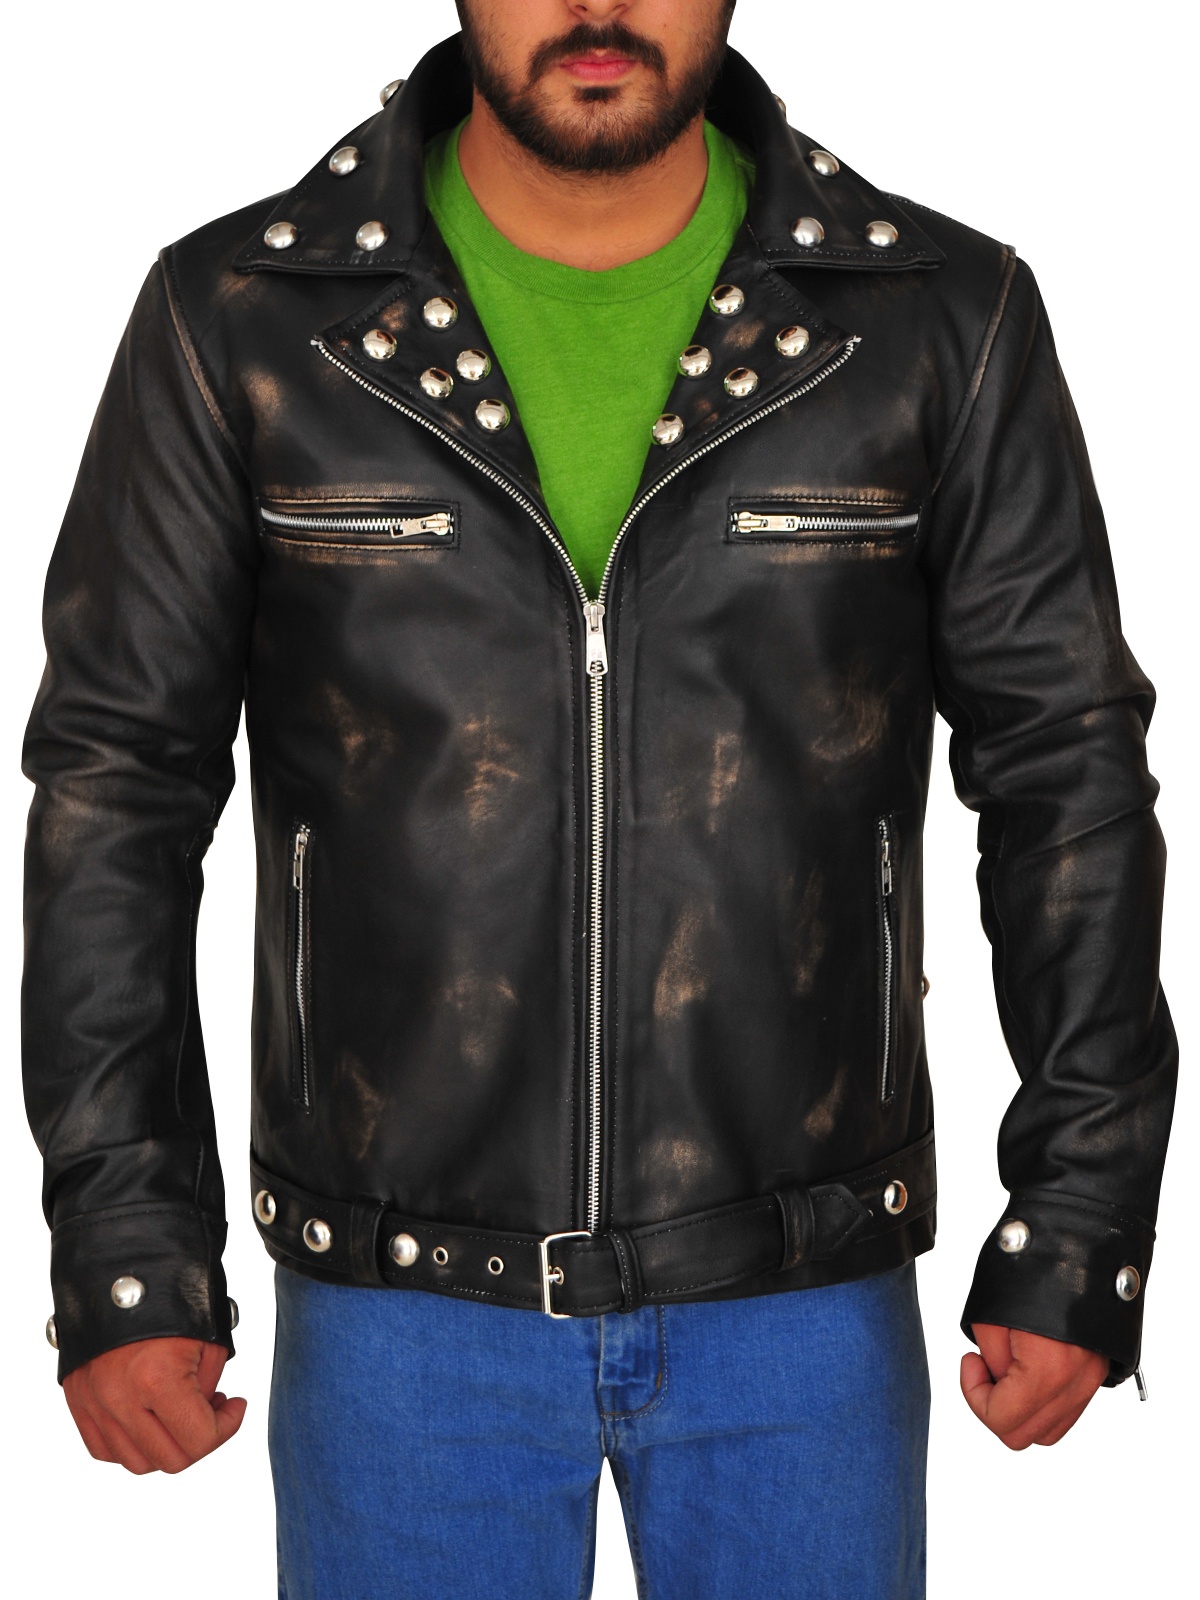 Tunnel Snakes Rule Fallout 3 Leather Jacket - AirBorne Jacket